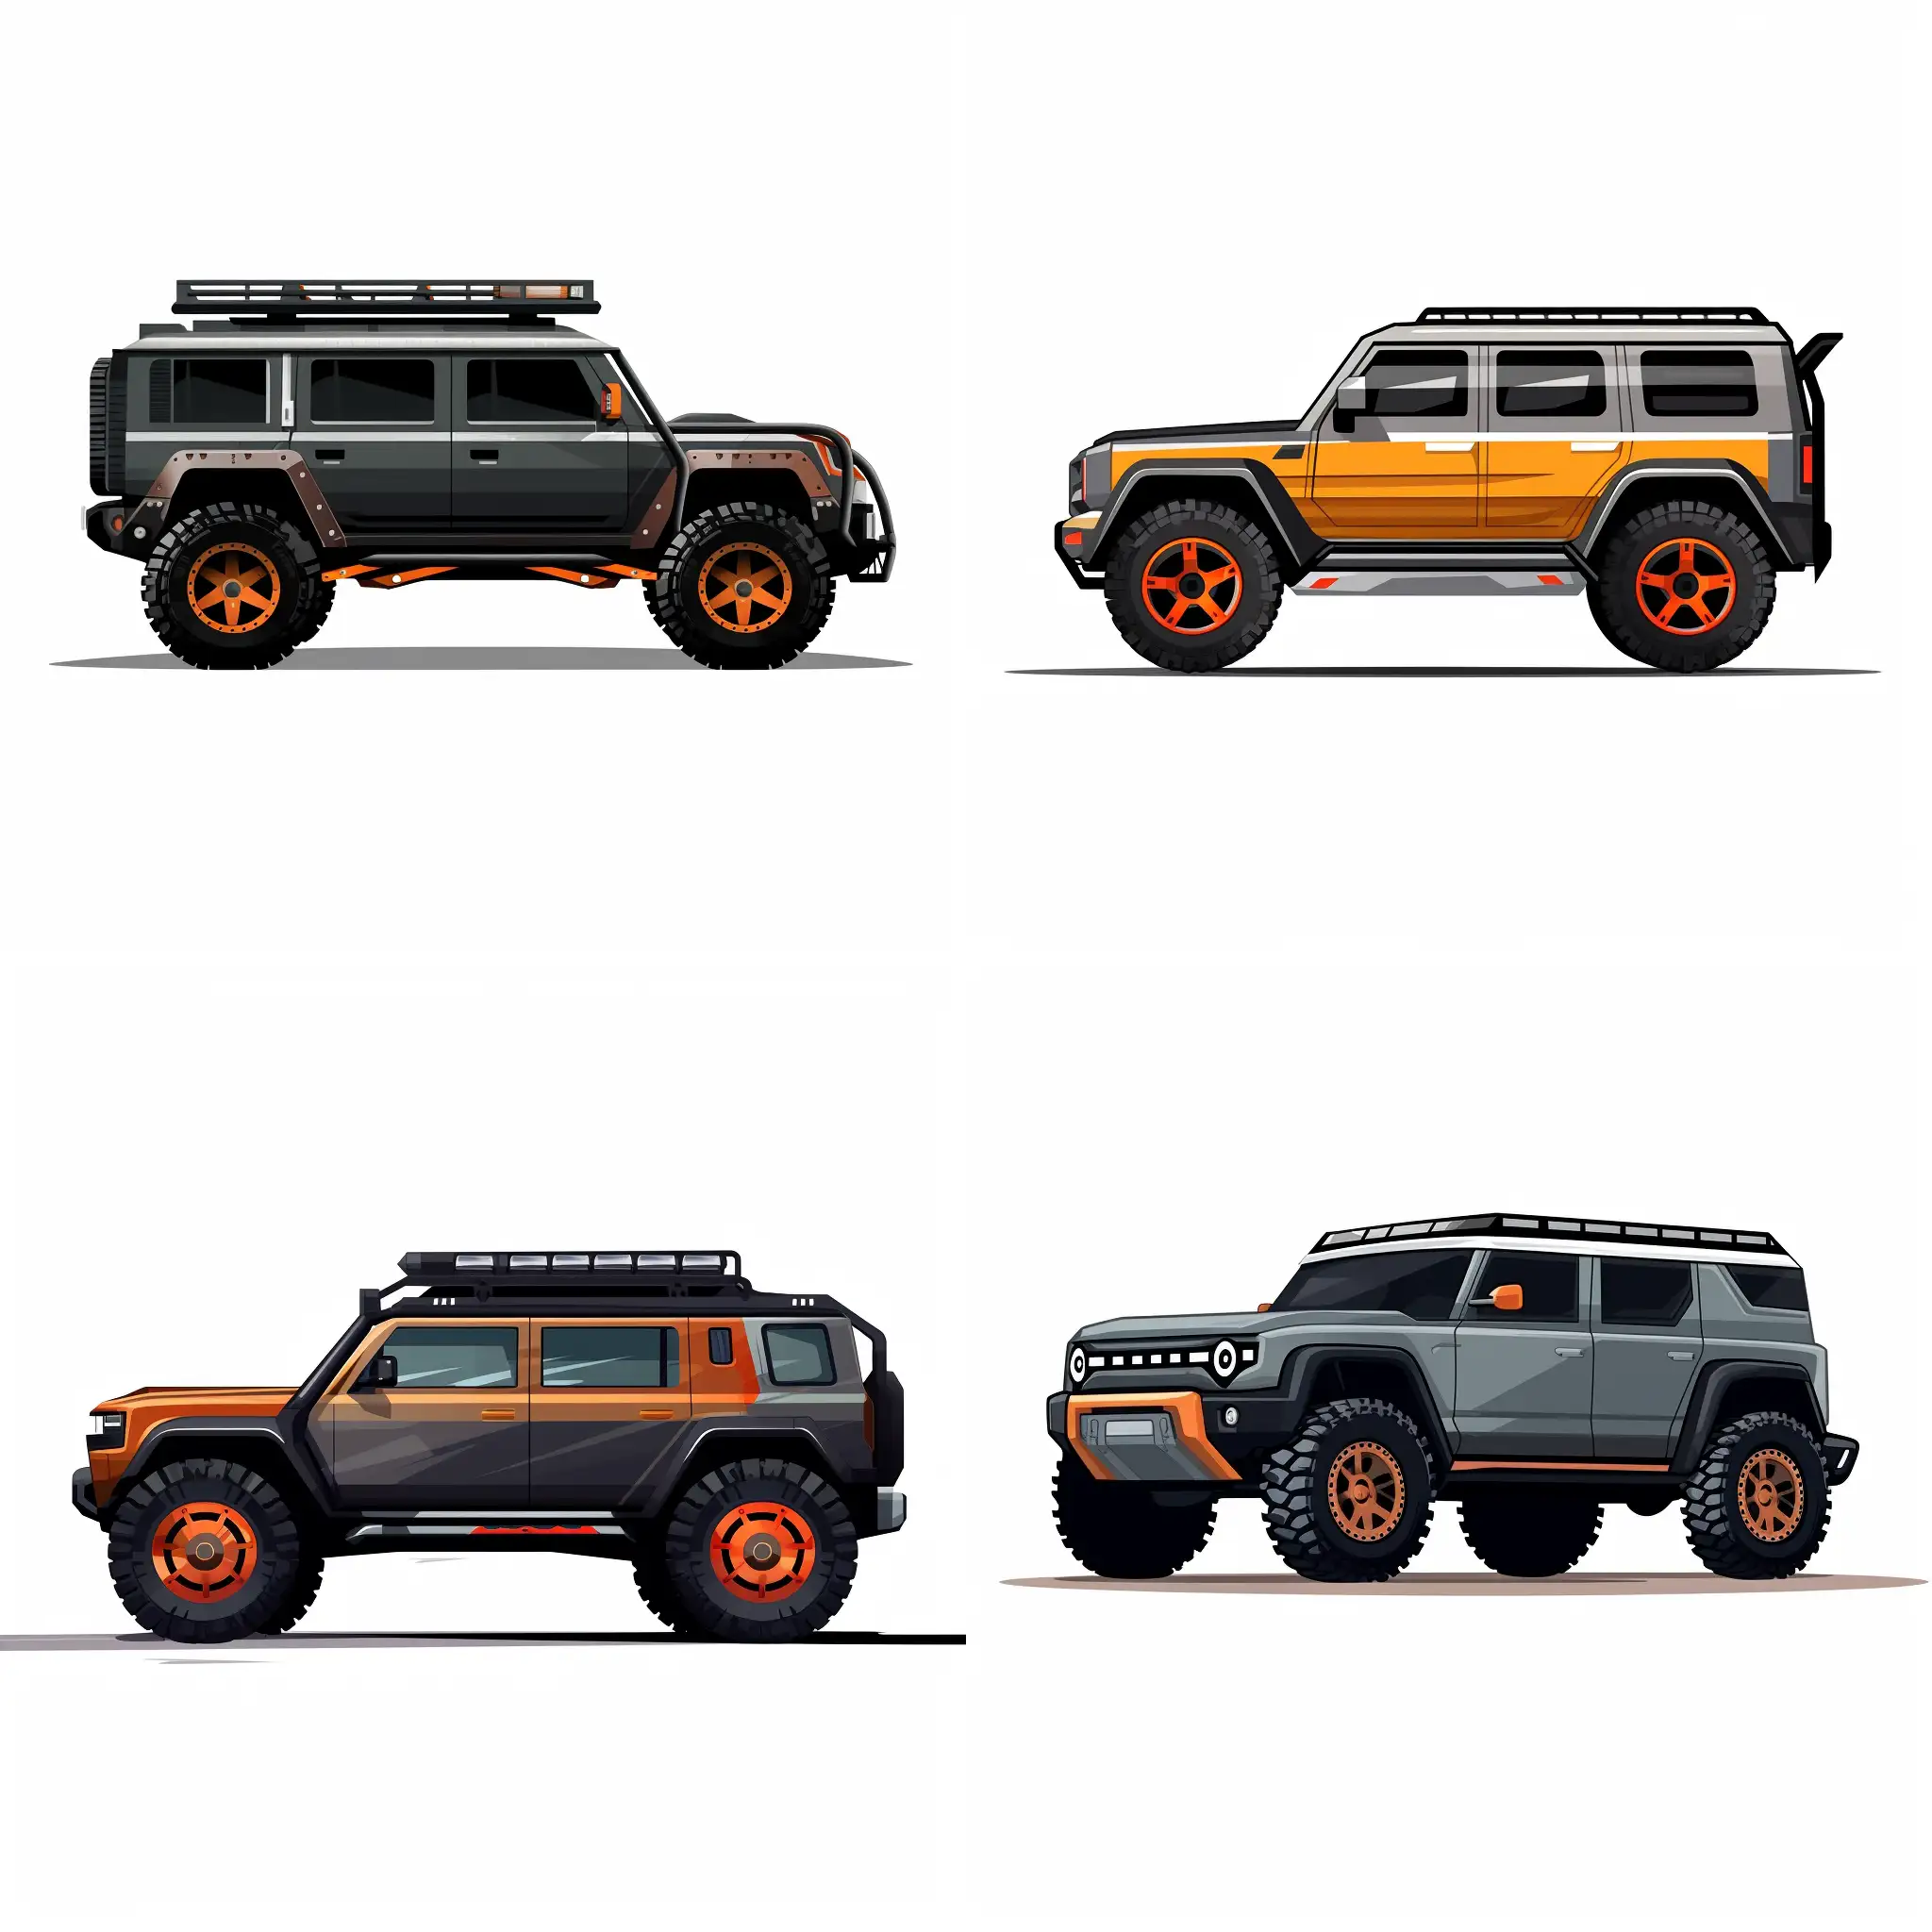 Futuristic-OffRoad-Car-with-Oversized-Tires-2D-Flat-Colors